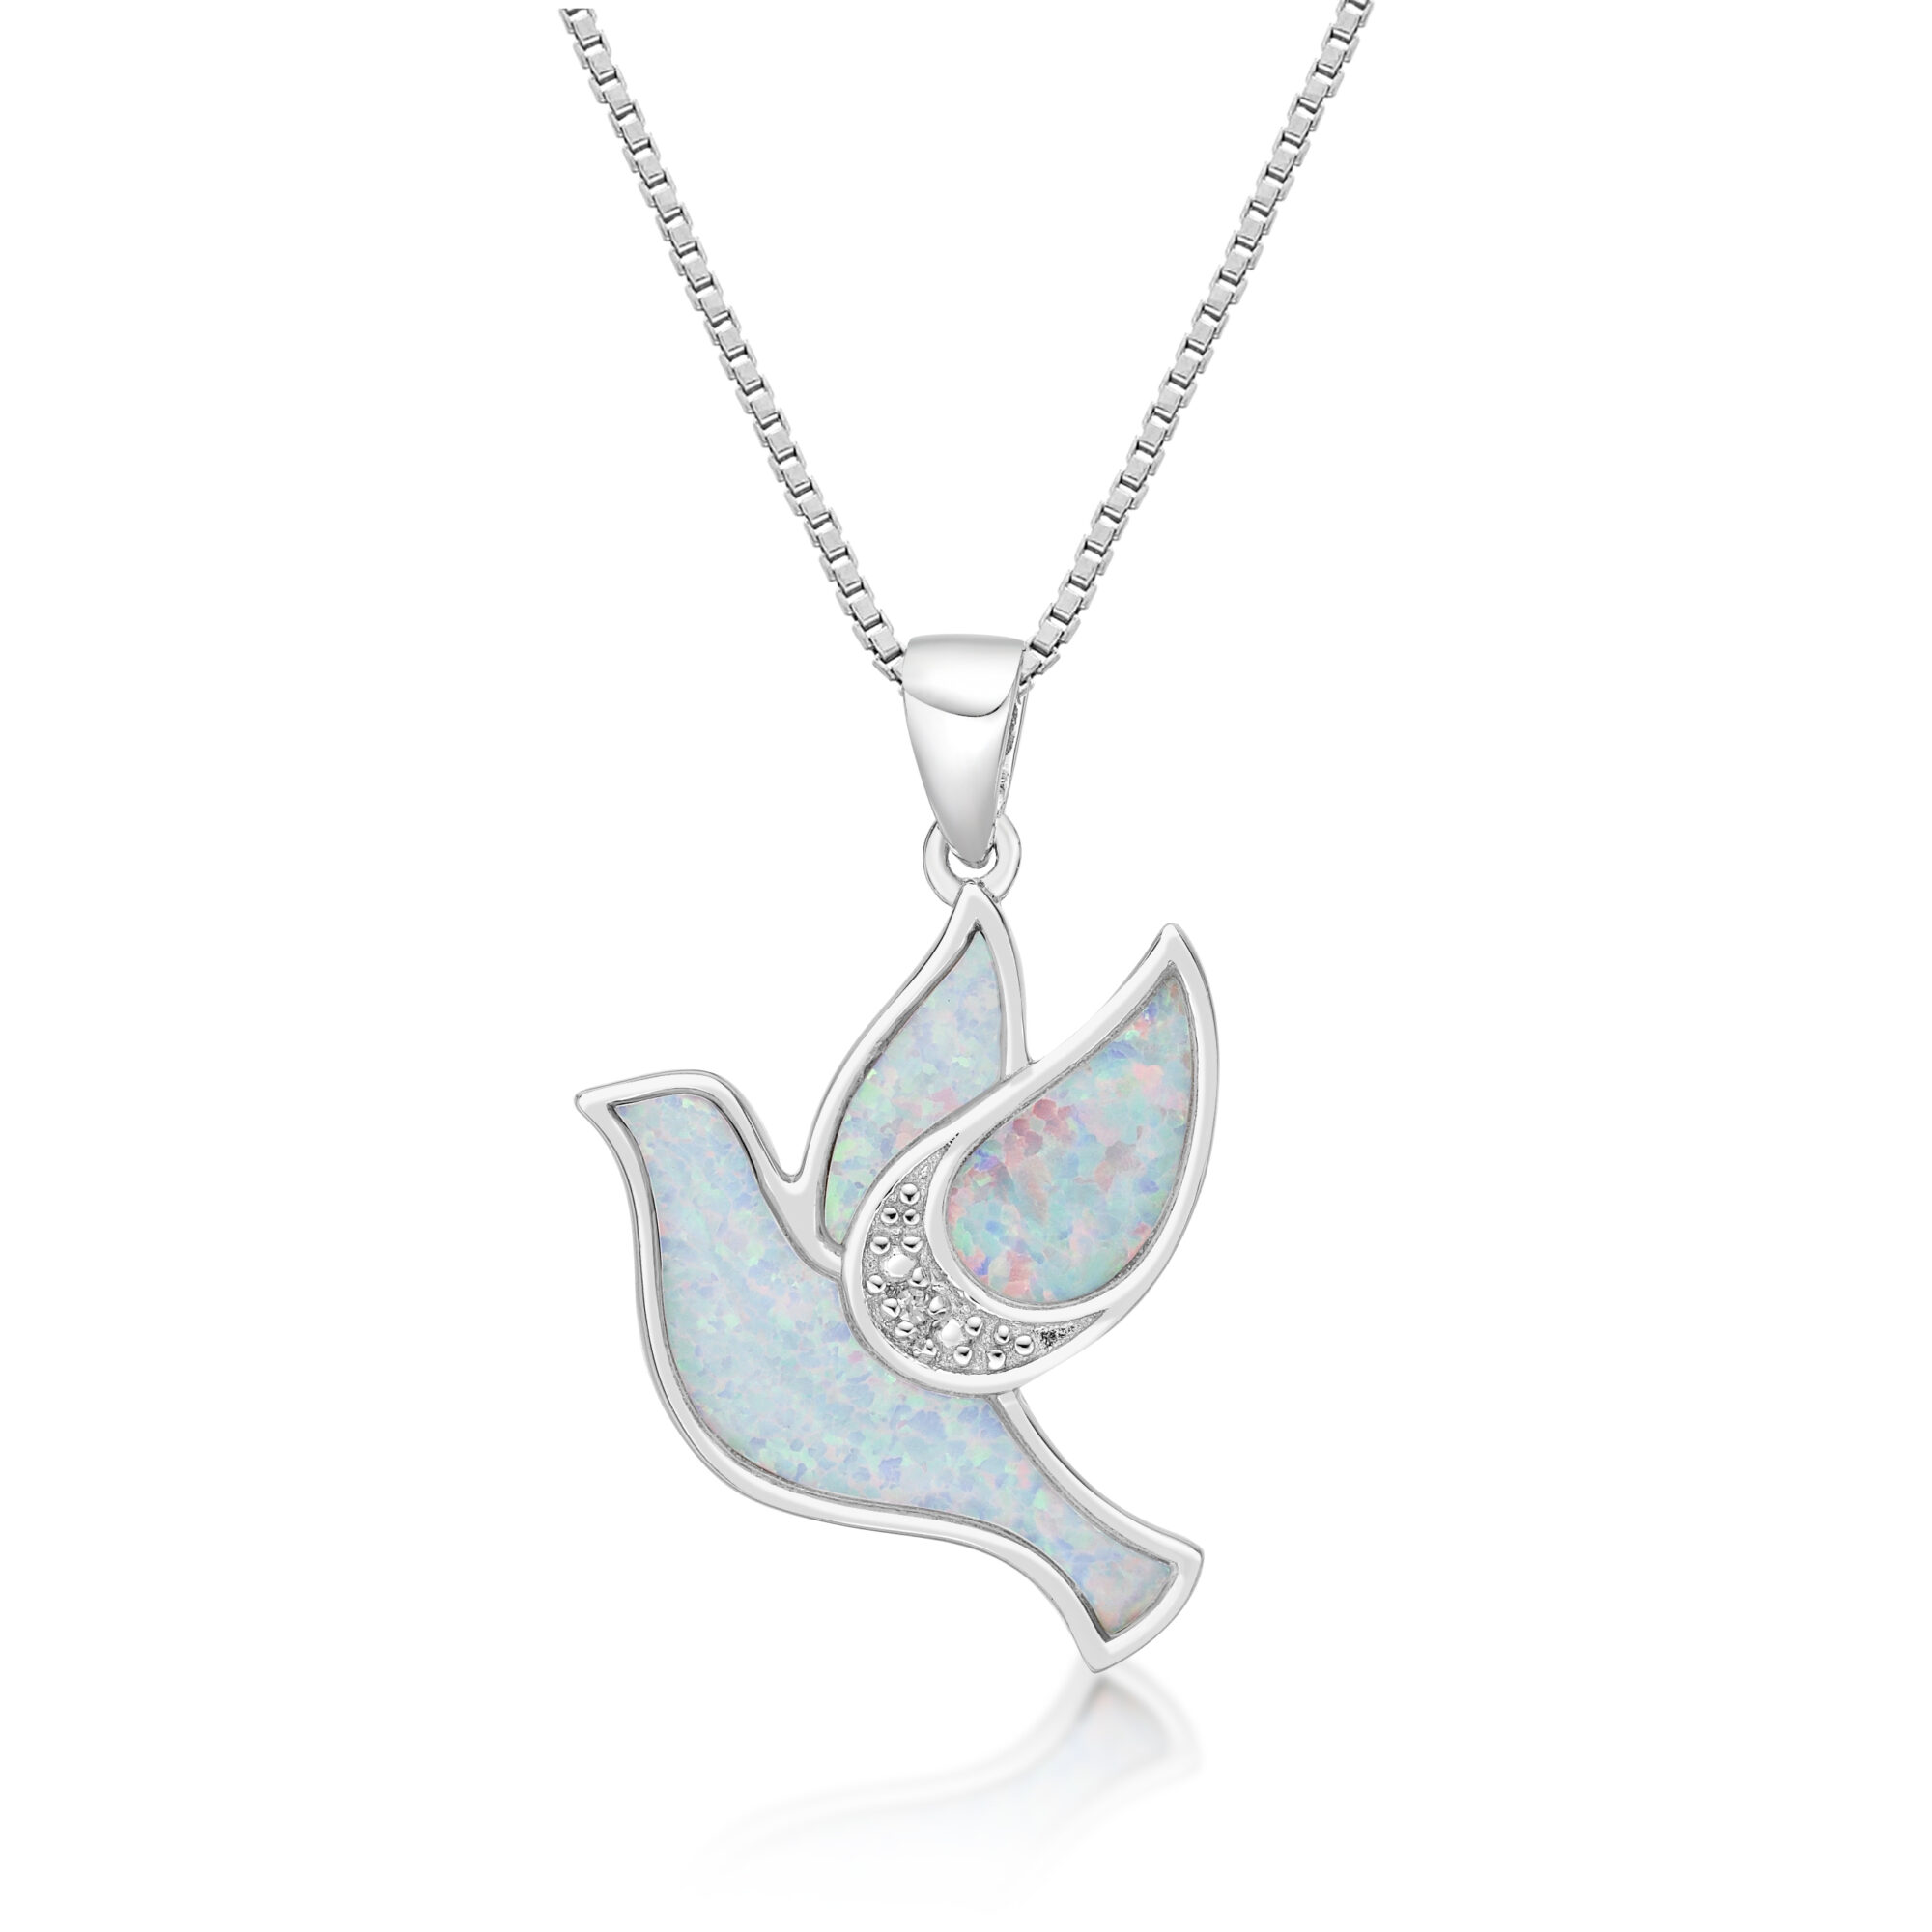 Lavari Jewelers Women's Created White Opal Dove Diamond Pendant with Lobster Clasp, Sterling Silver, .004 Cttw, 18 Inch Cable Chain